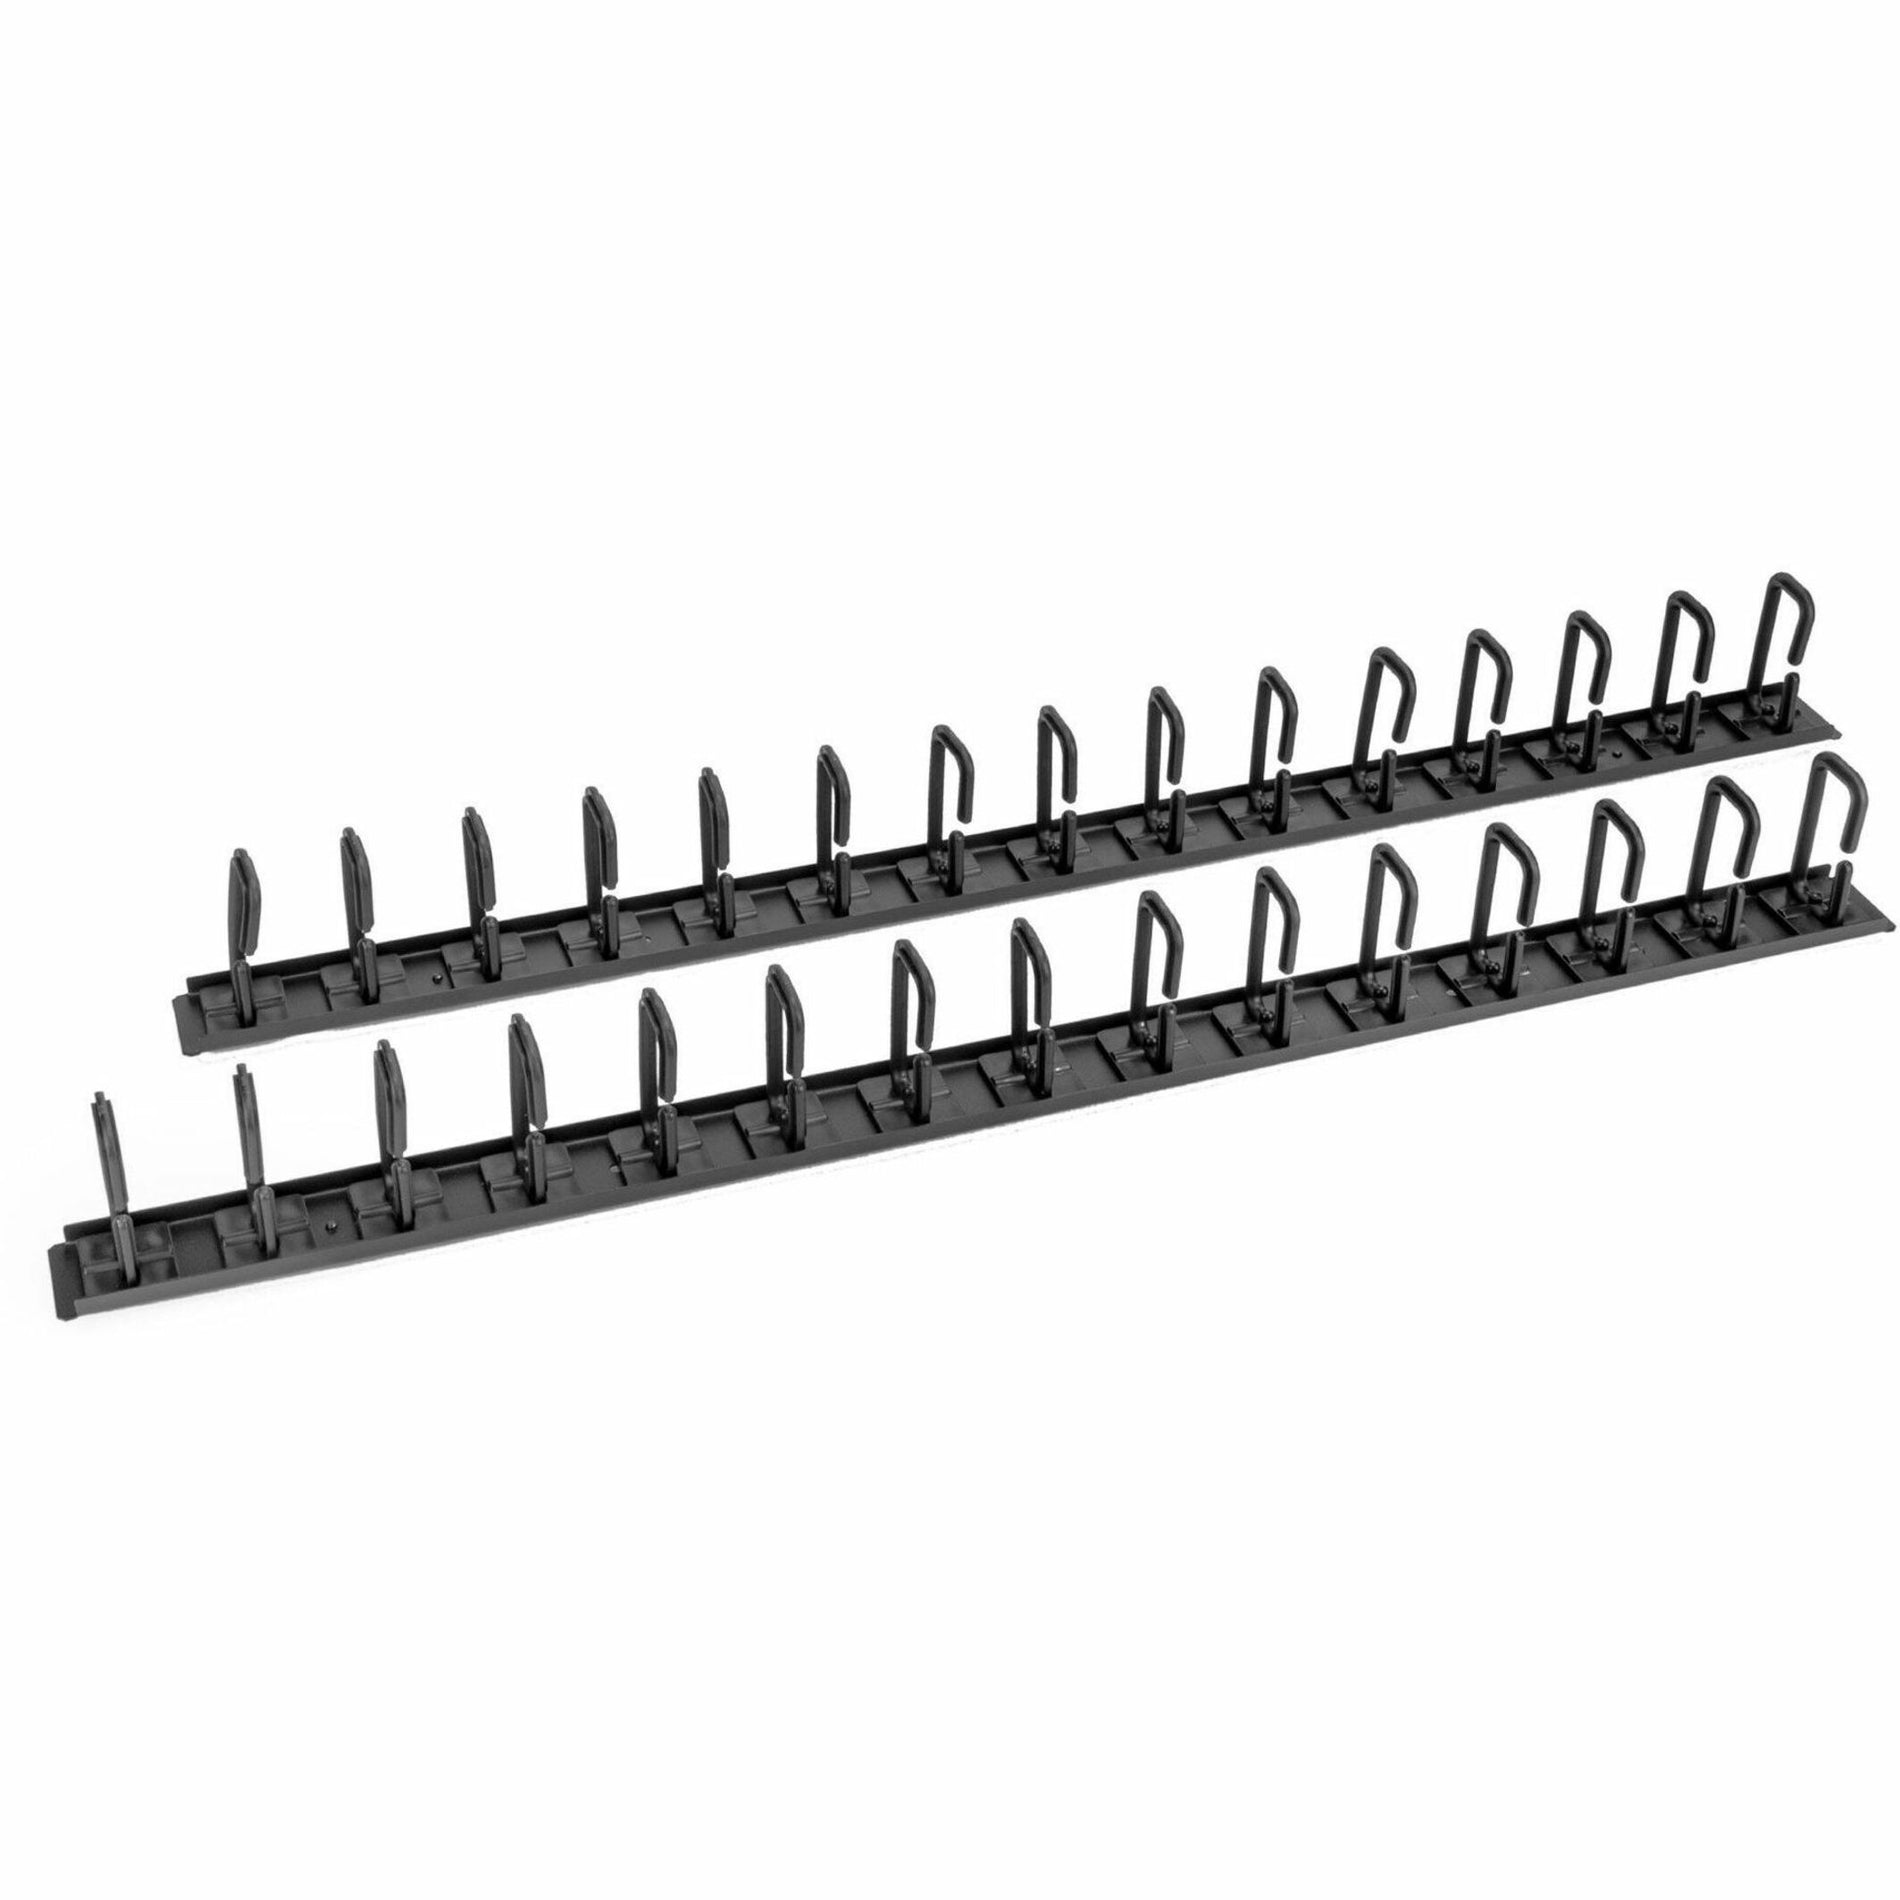 Rocstor Y10E052-B1 VERTICAL CABLE ORGANIZER WITH D-RING HOOKS - 6 FT